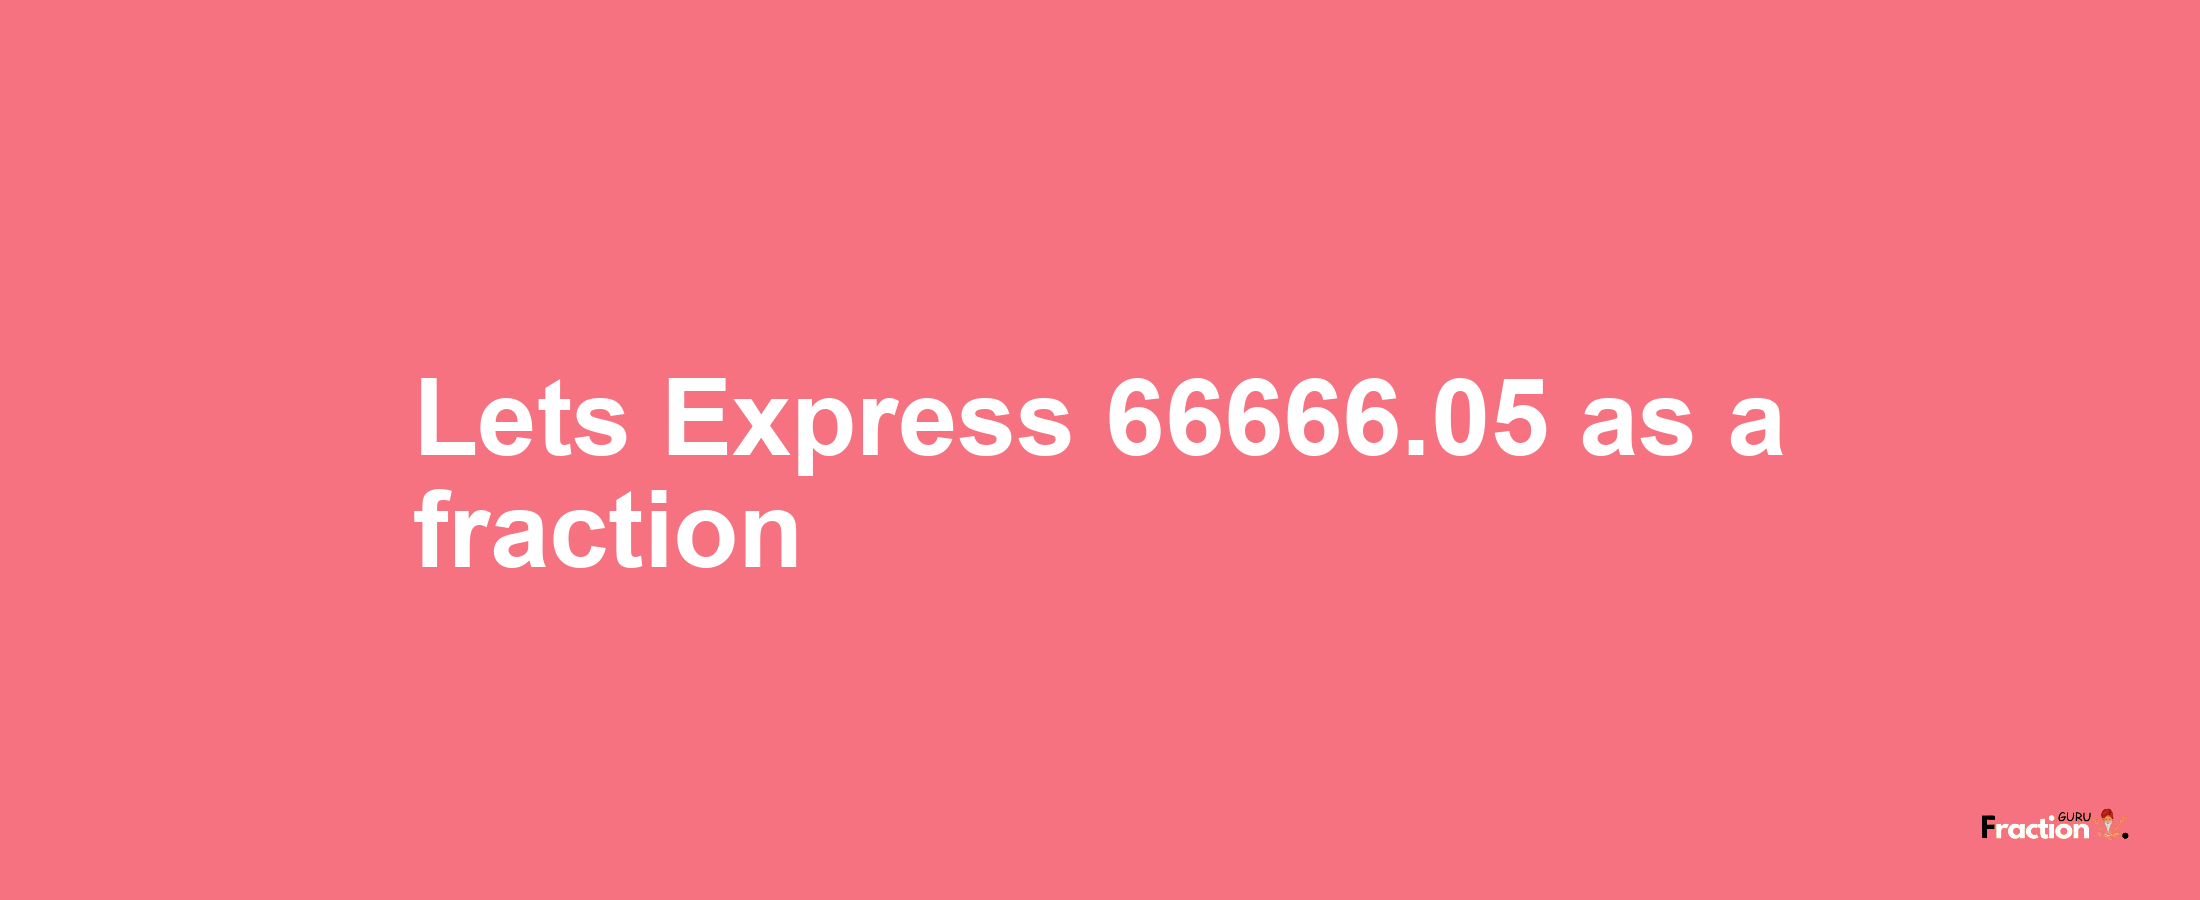 Lets Express 66666.05 as afraction